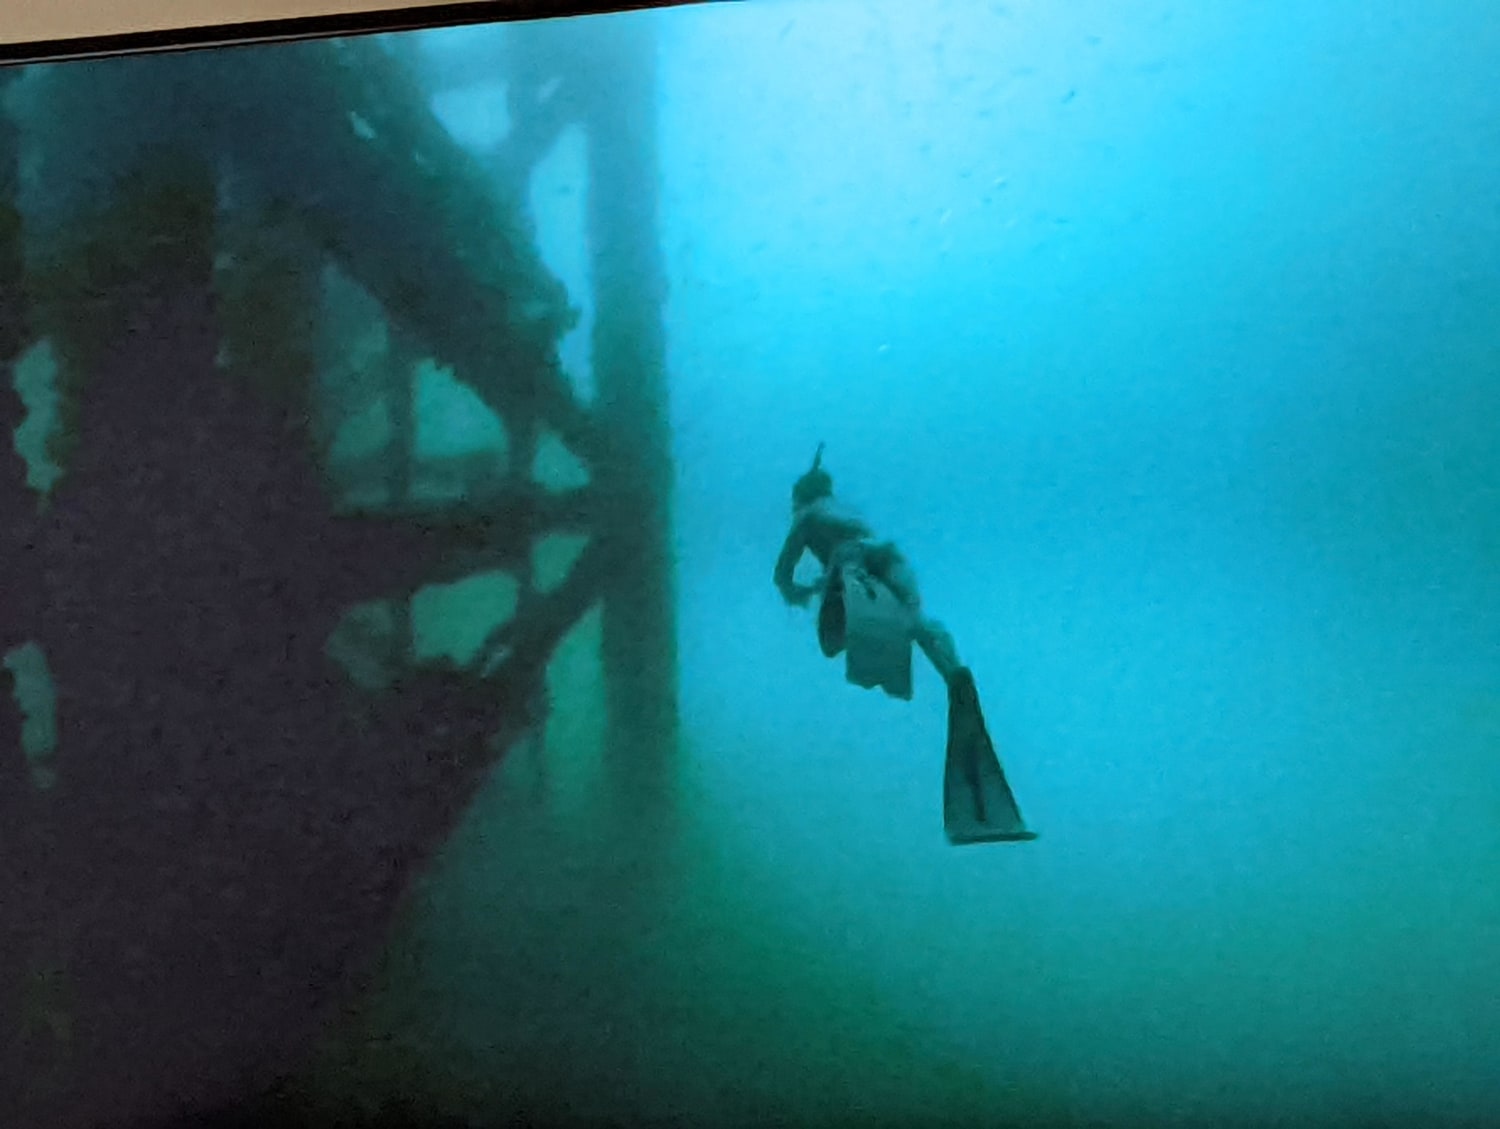 Spear fishing in the Gulf of Mexico around Oil rigs! Oh H**L NO!